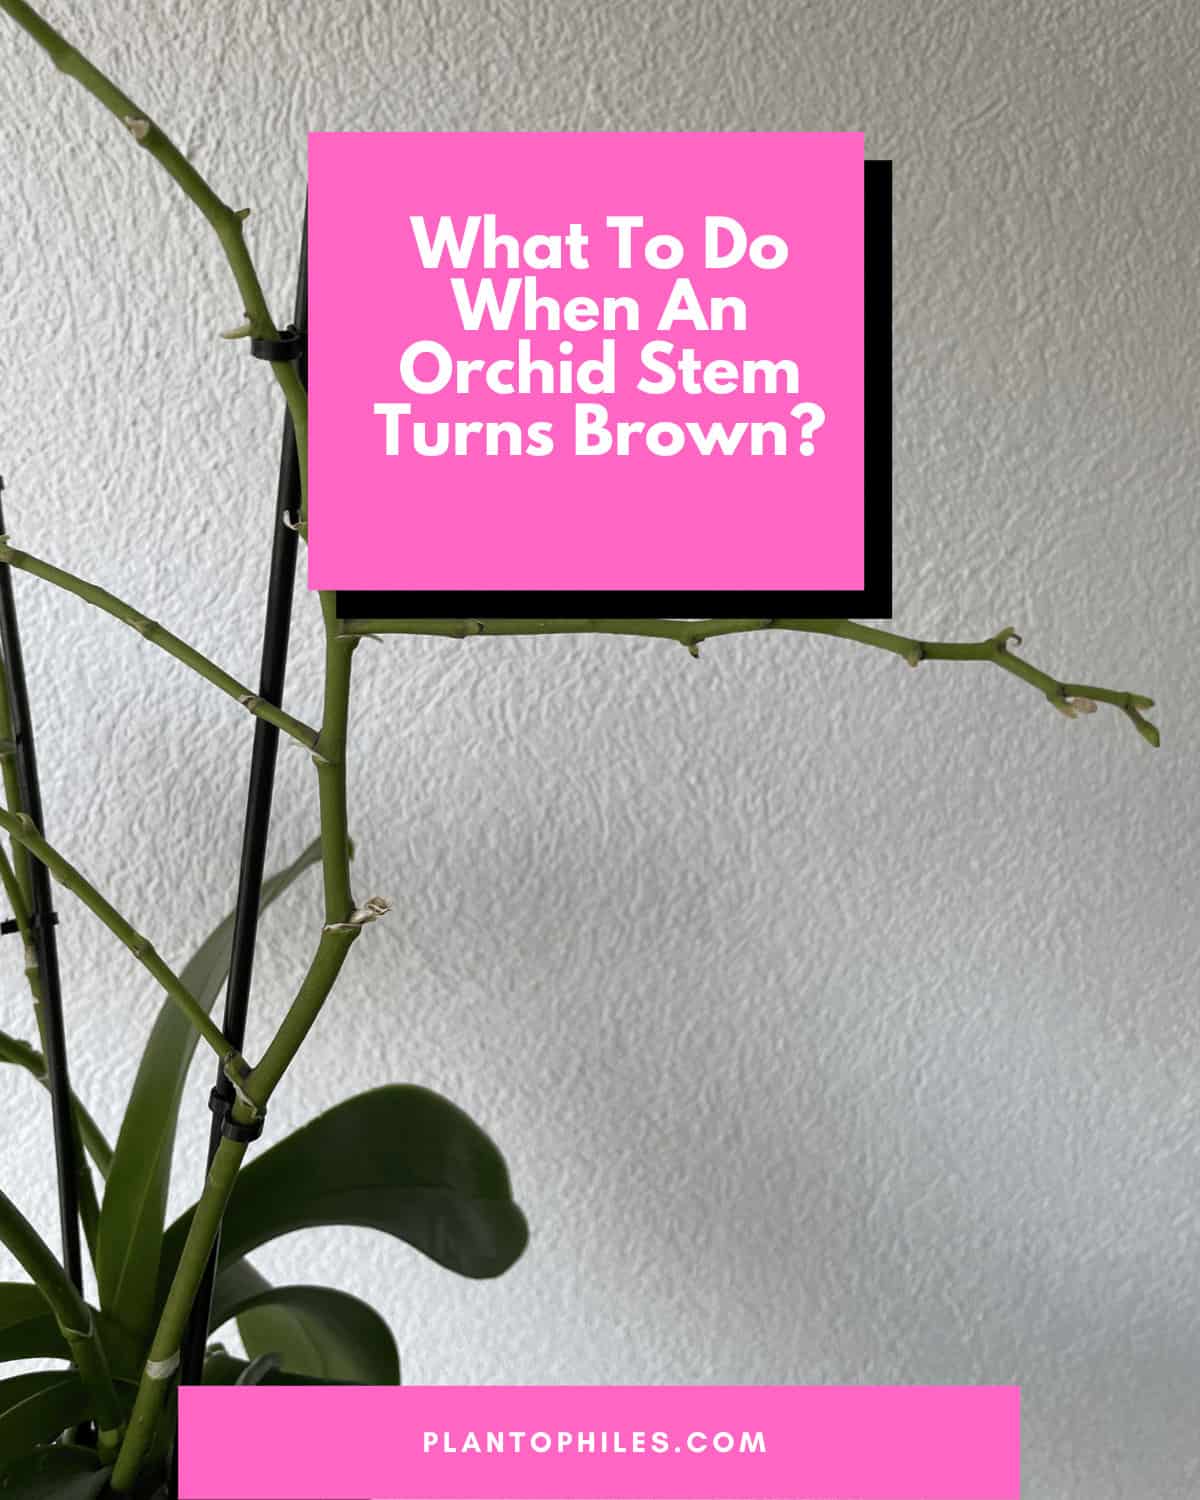 What to do when an orchid stem turns brown